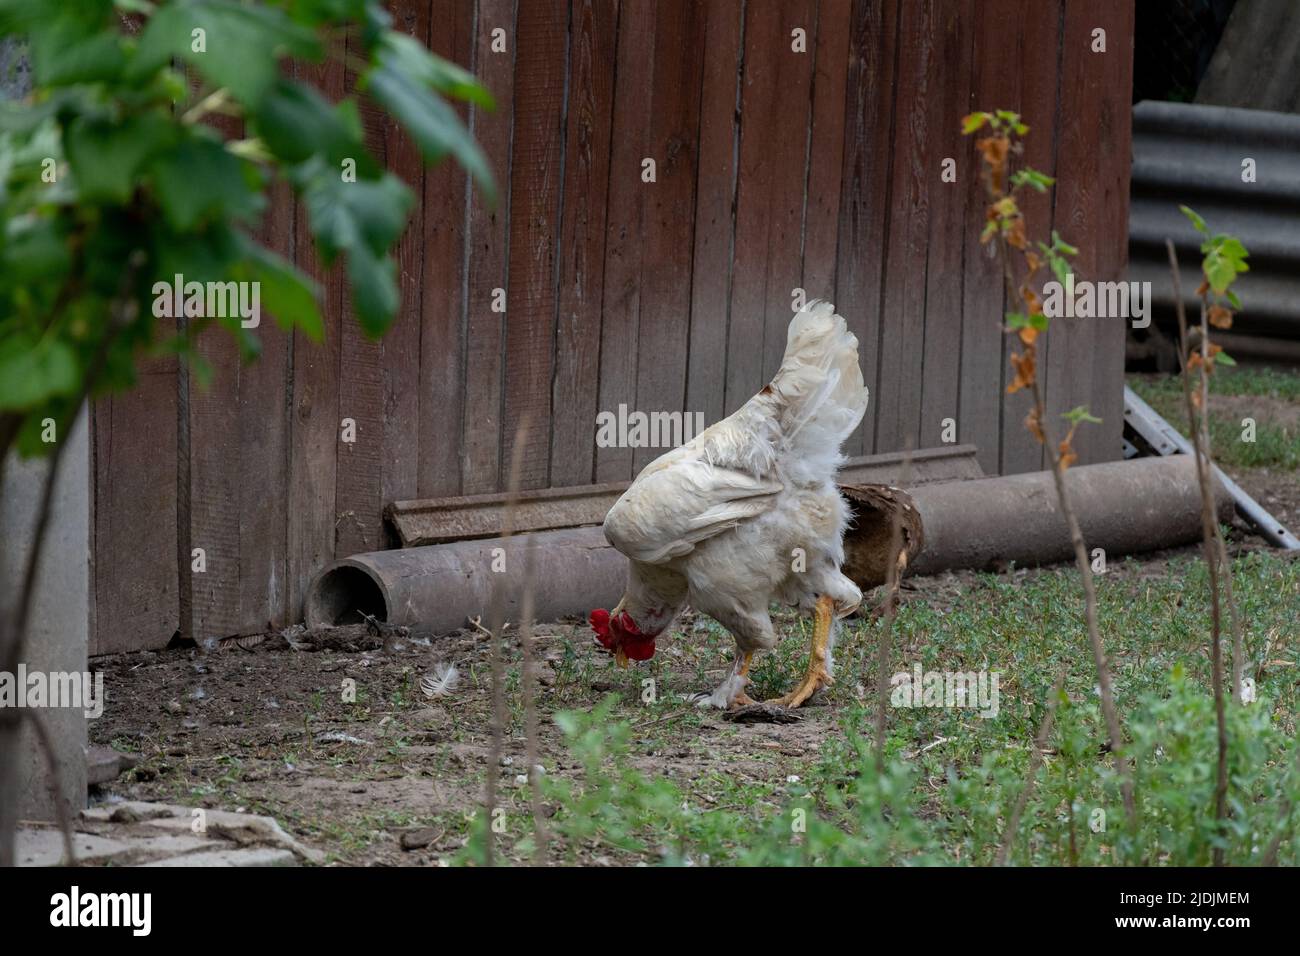 A young white rooster nibbles green grass in the backyard. Stock Photo